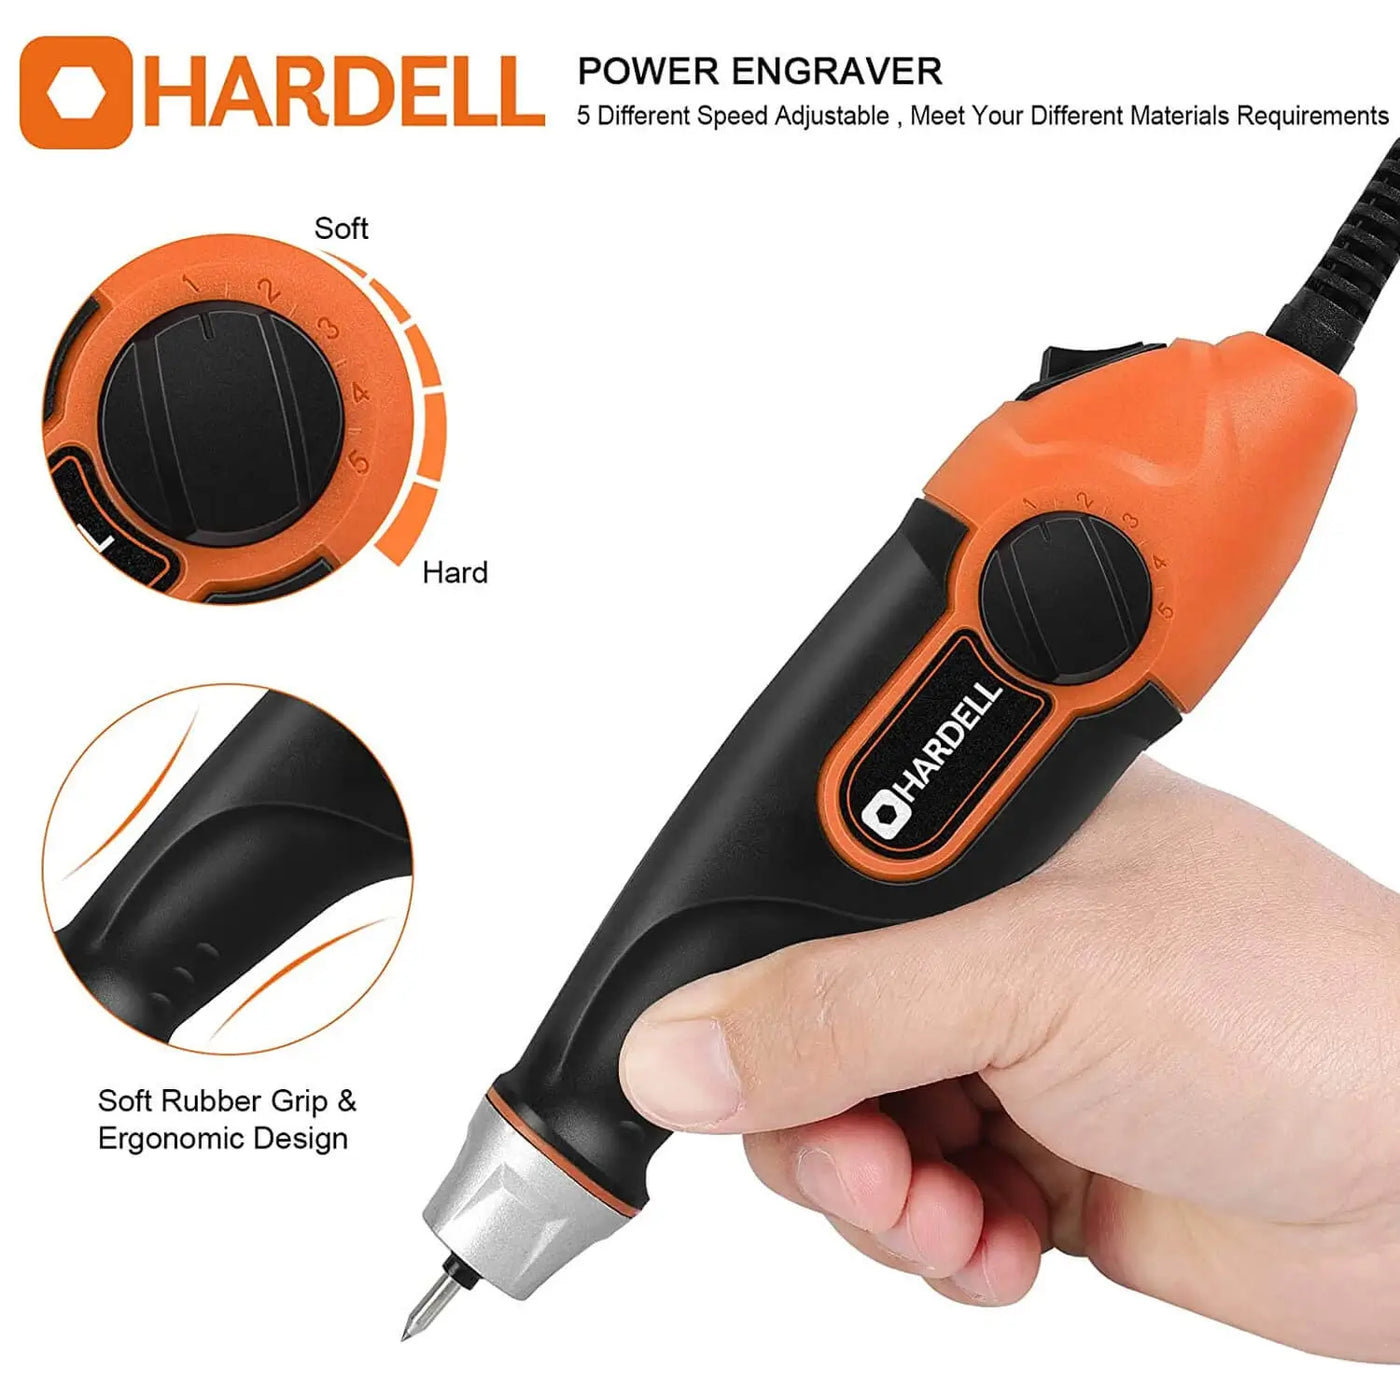 Hardell_105_24W_Corded_Engraver_06